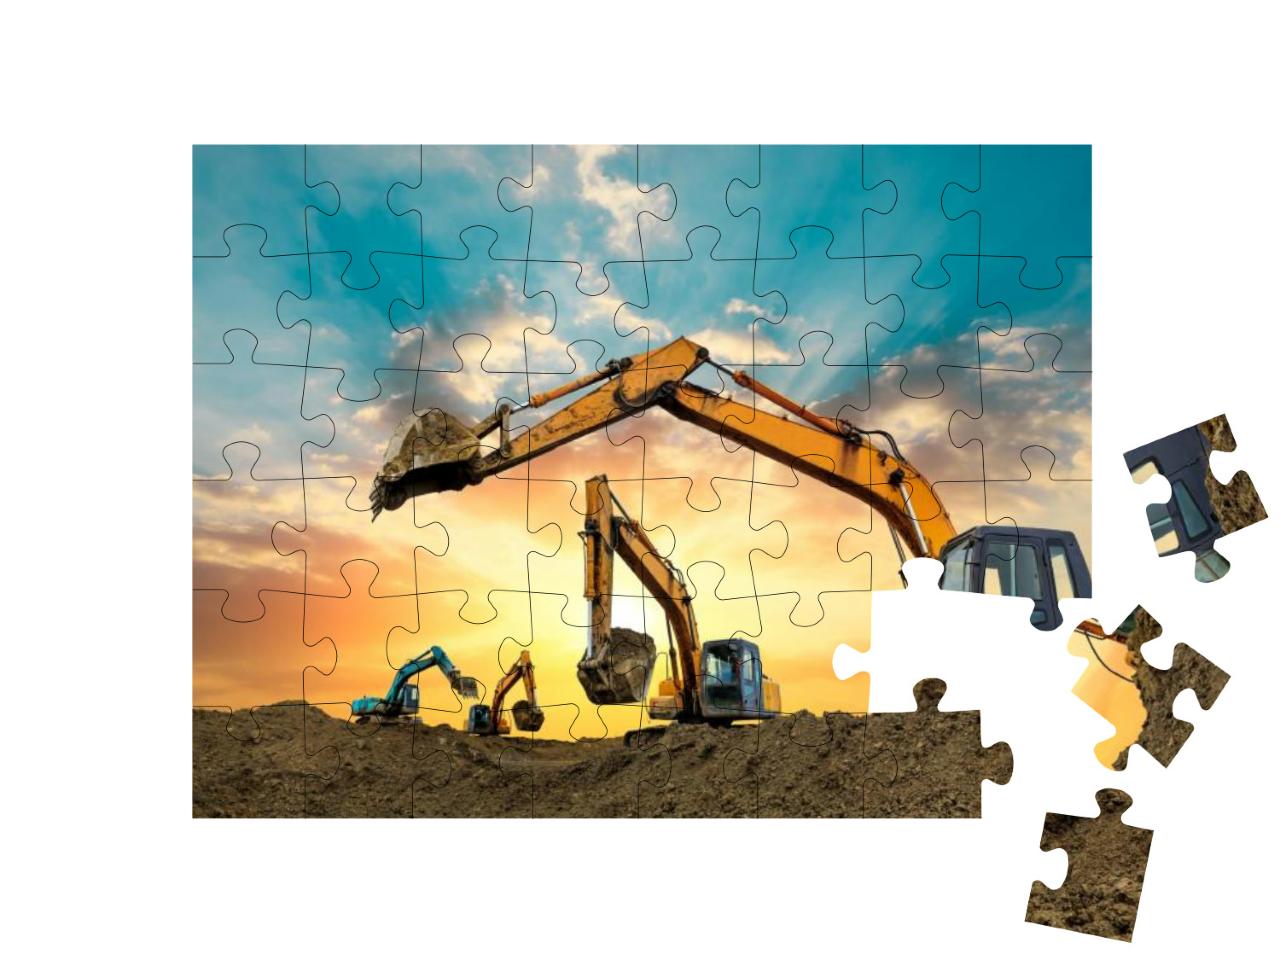 Four Excavators Work on Construction Site At Sunset... Jigsaw Puzzle with 48 pieces